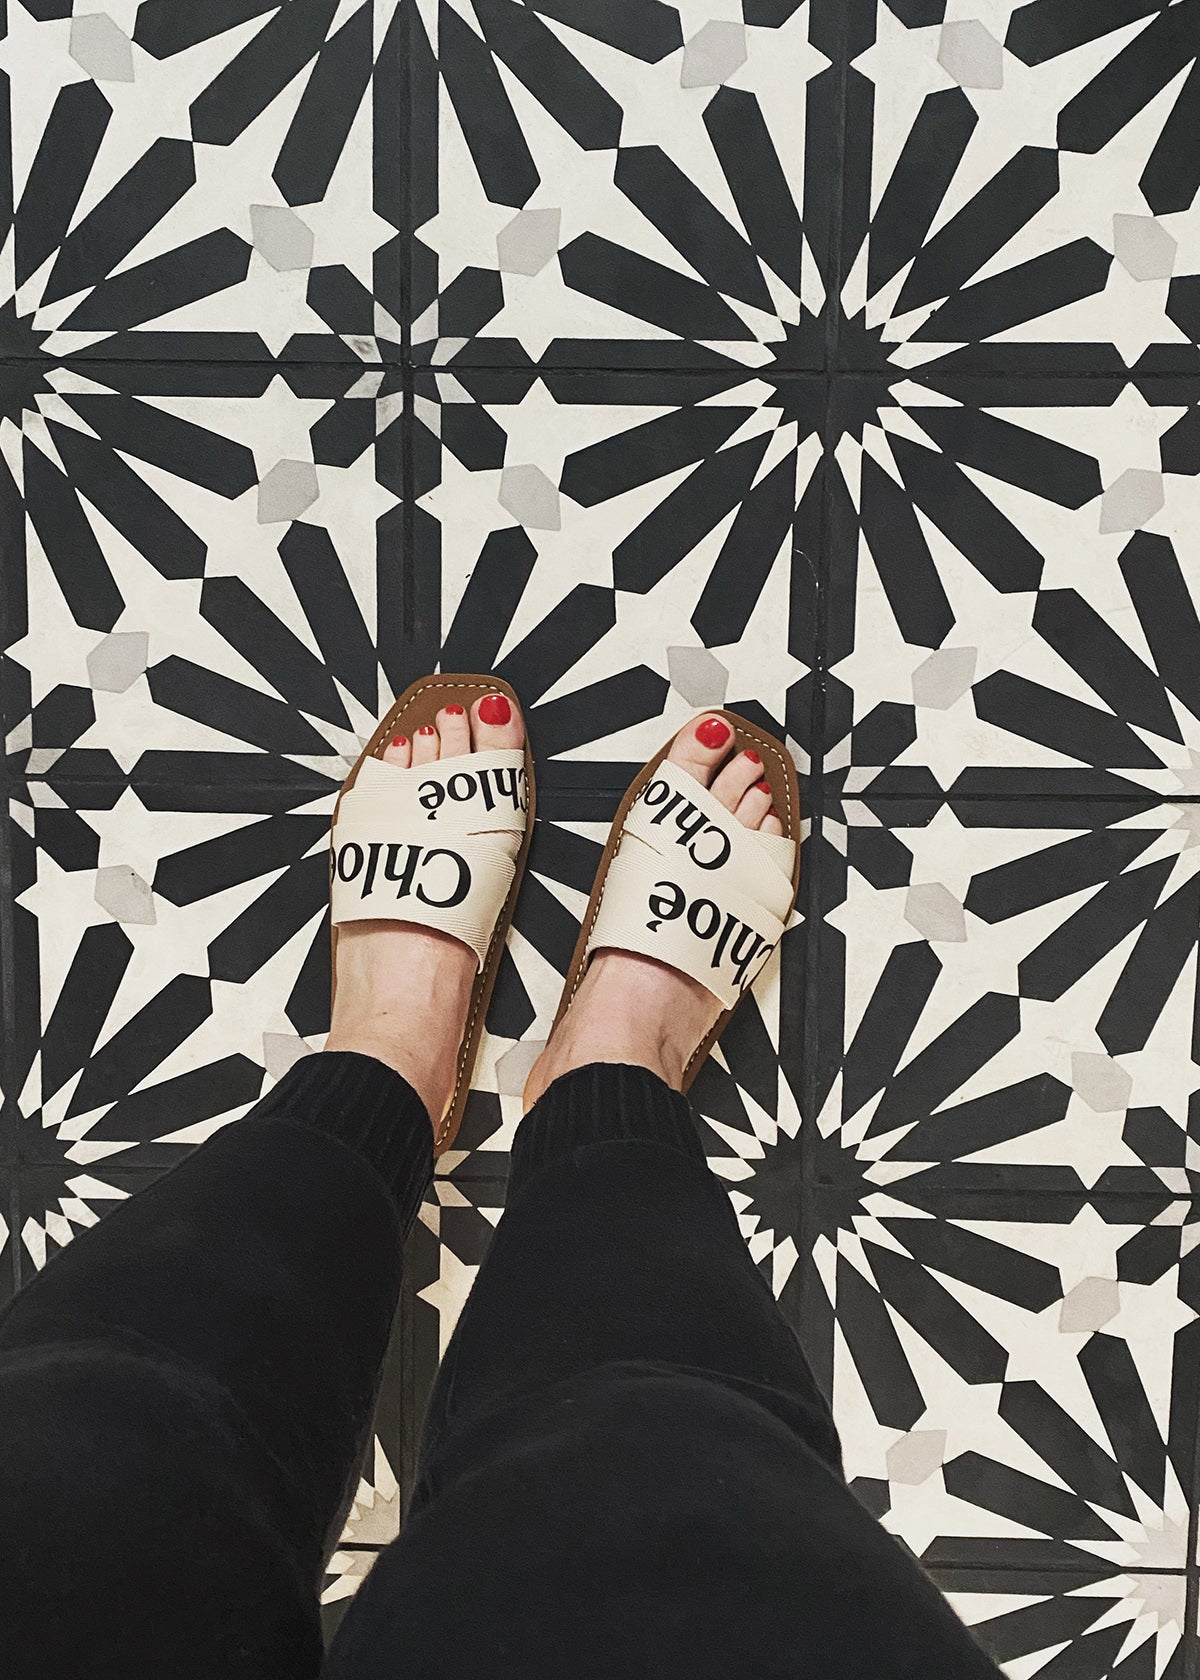 Looking down at Chloé slide sandals on a geometric cement tile floor by Clé.